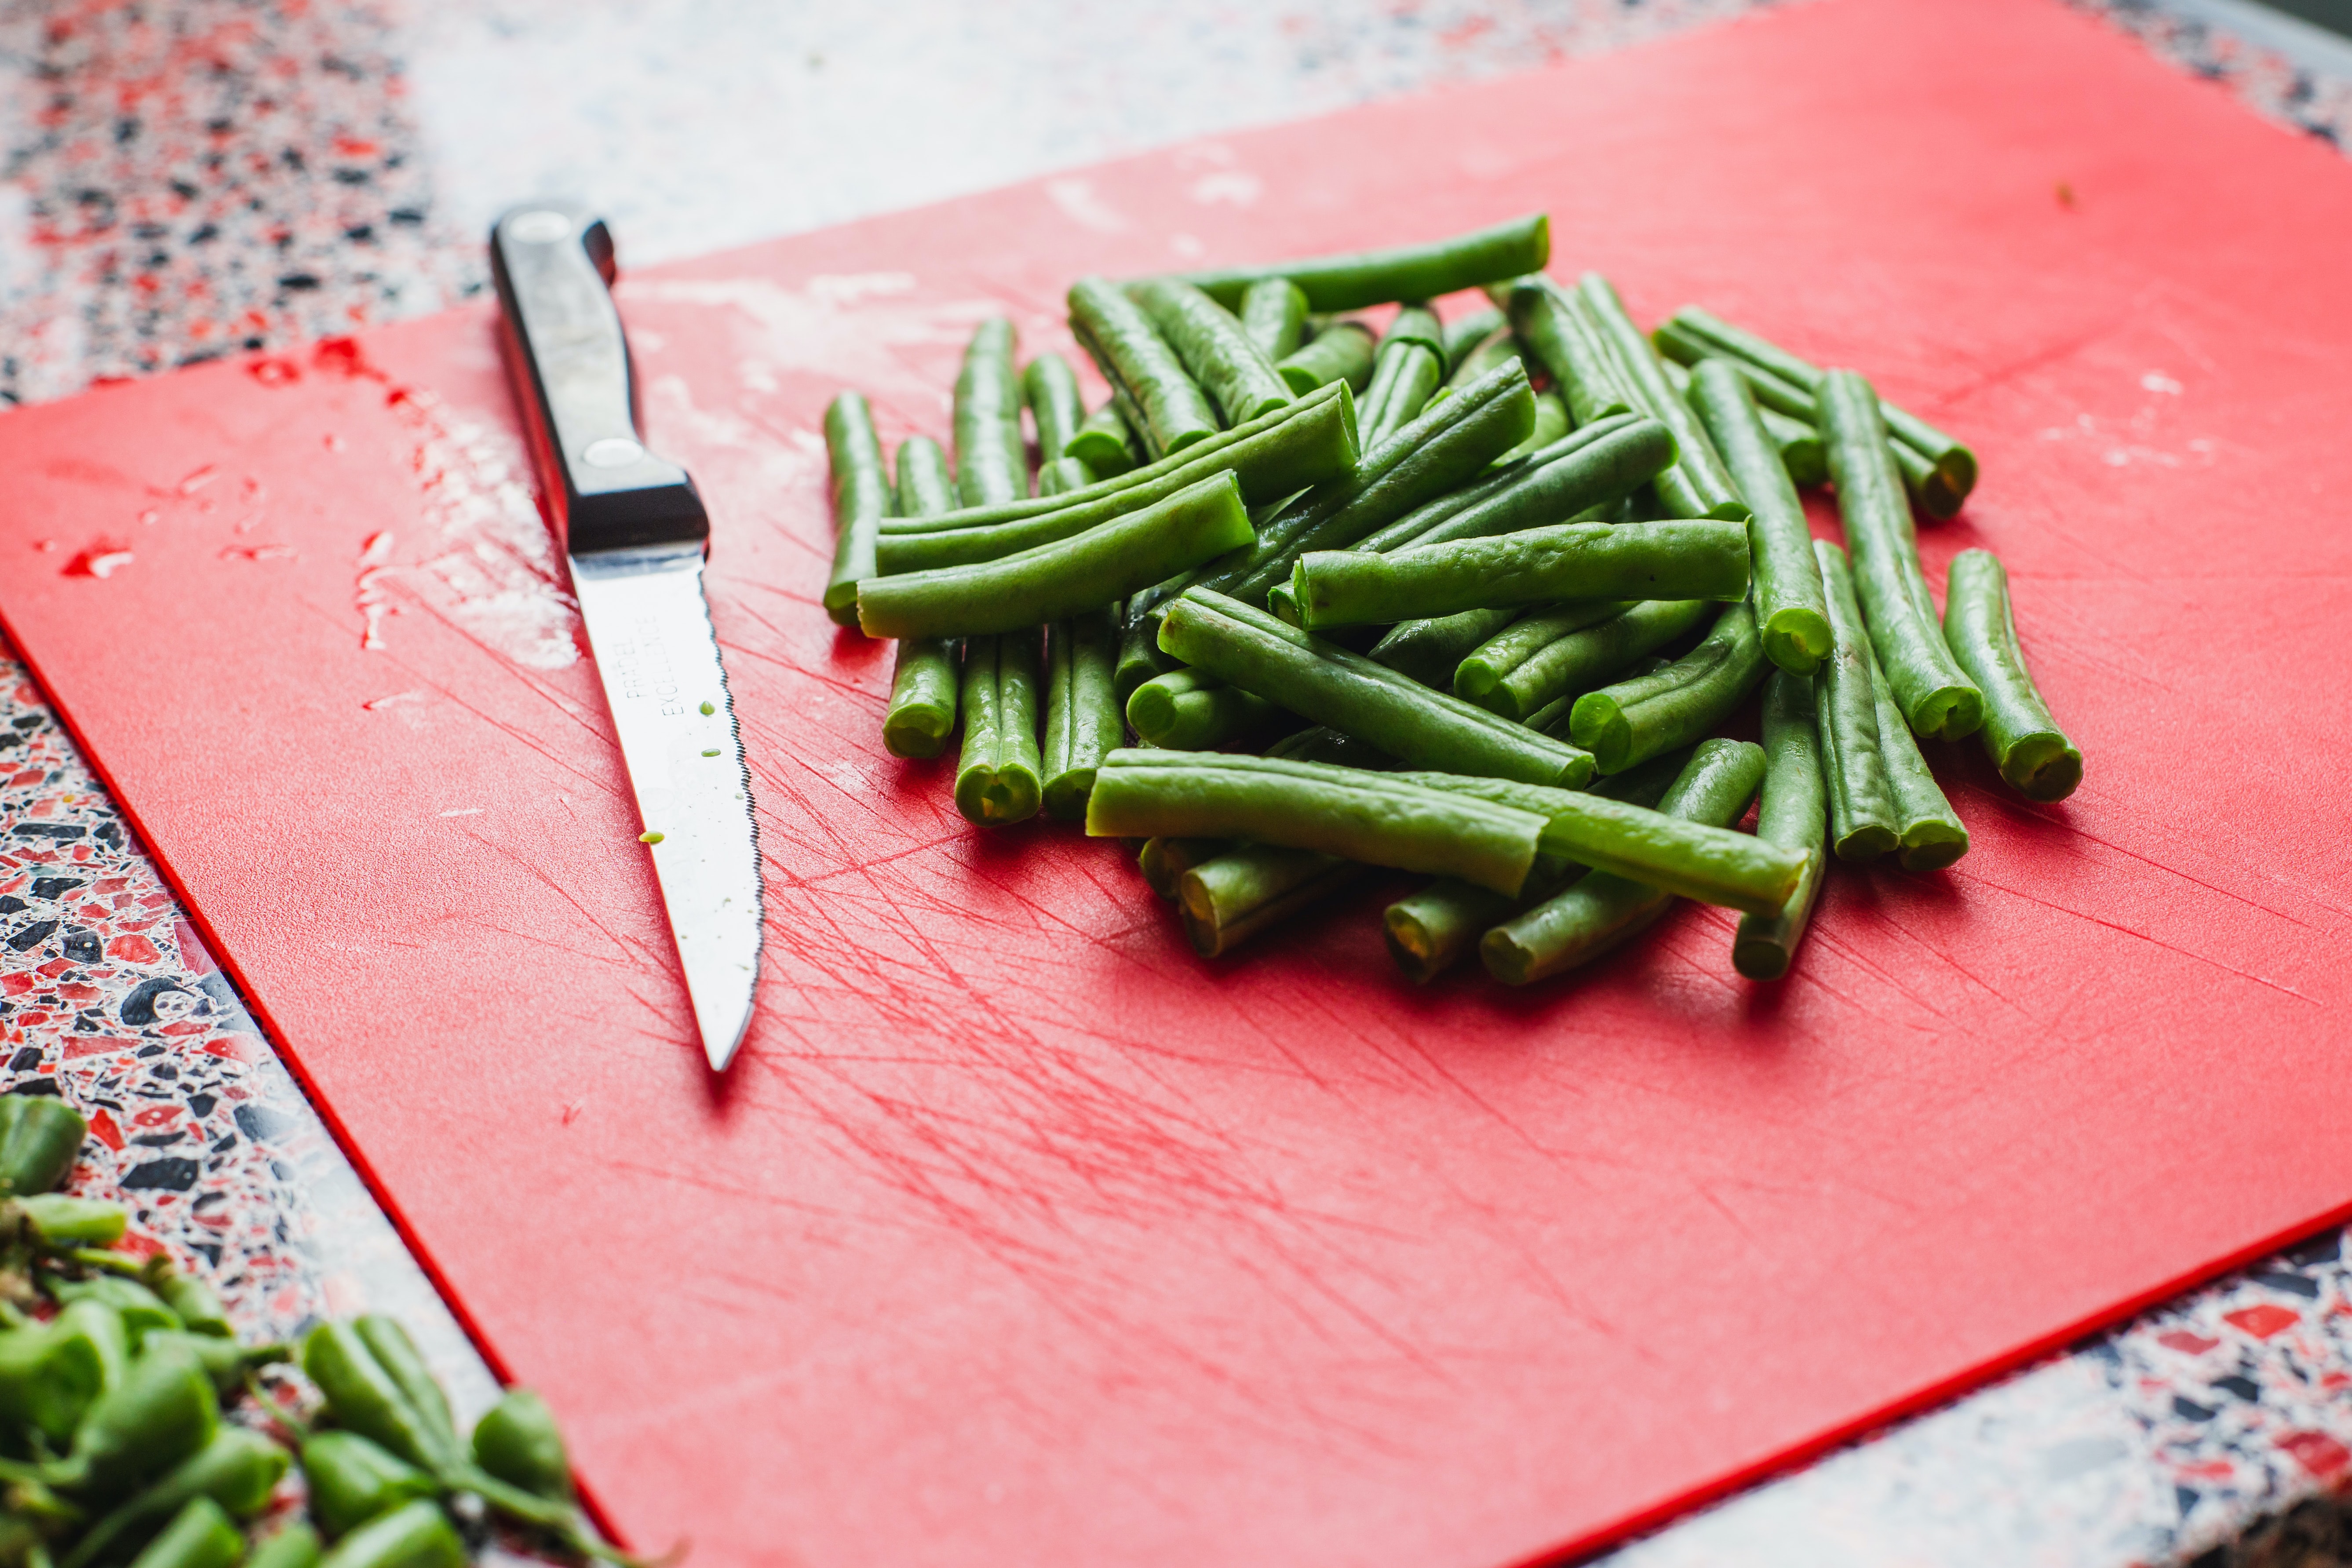 green beans on a red cutting board